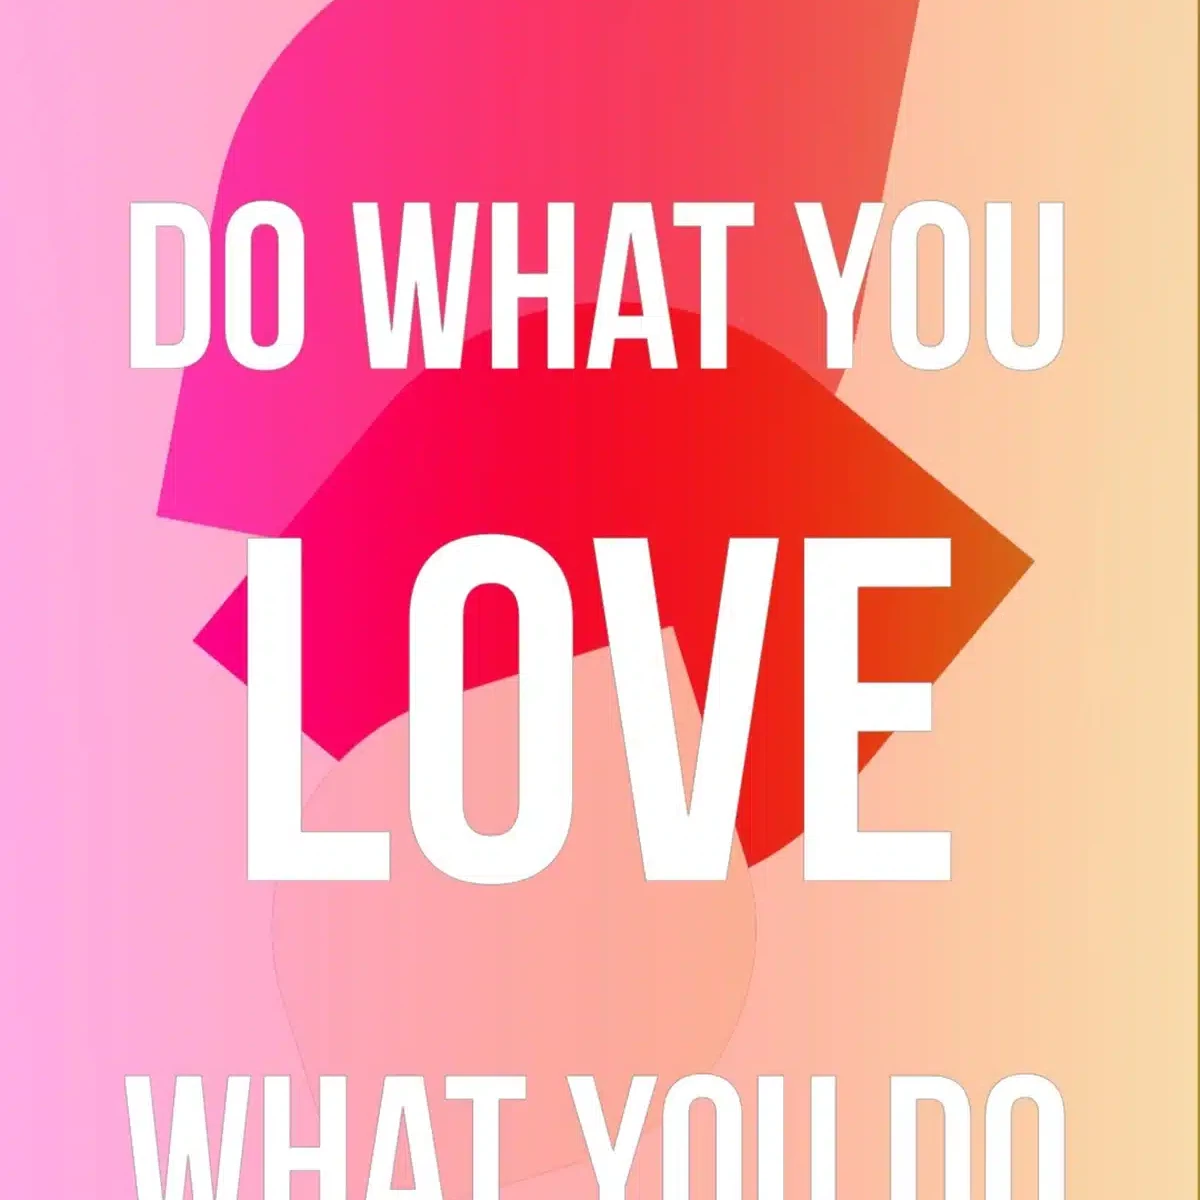 Do what you love-Love what you do